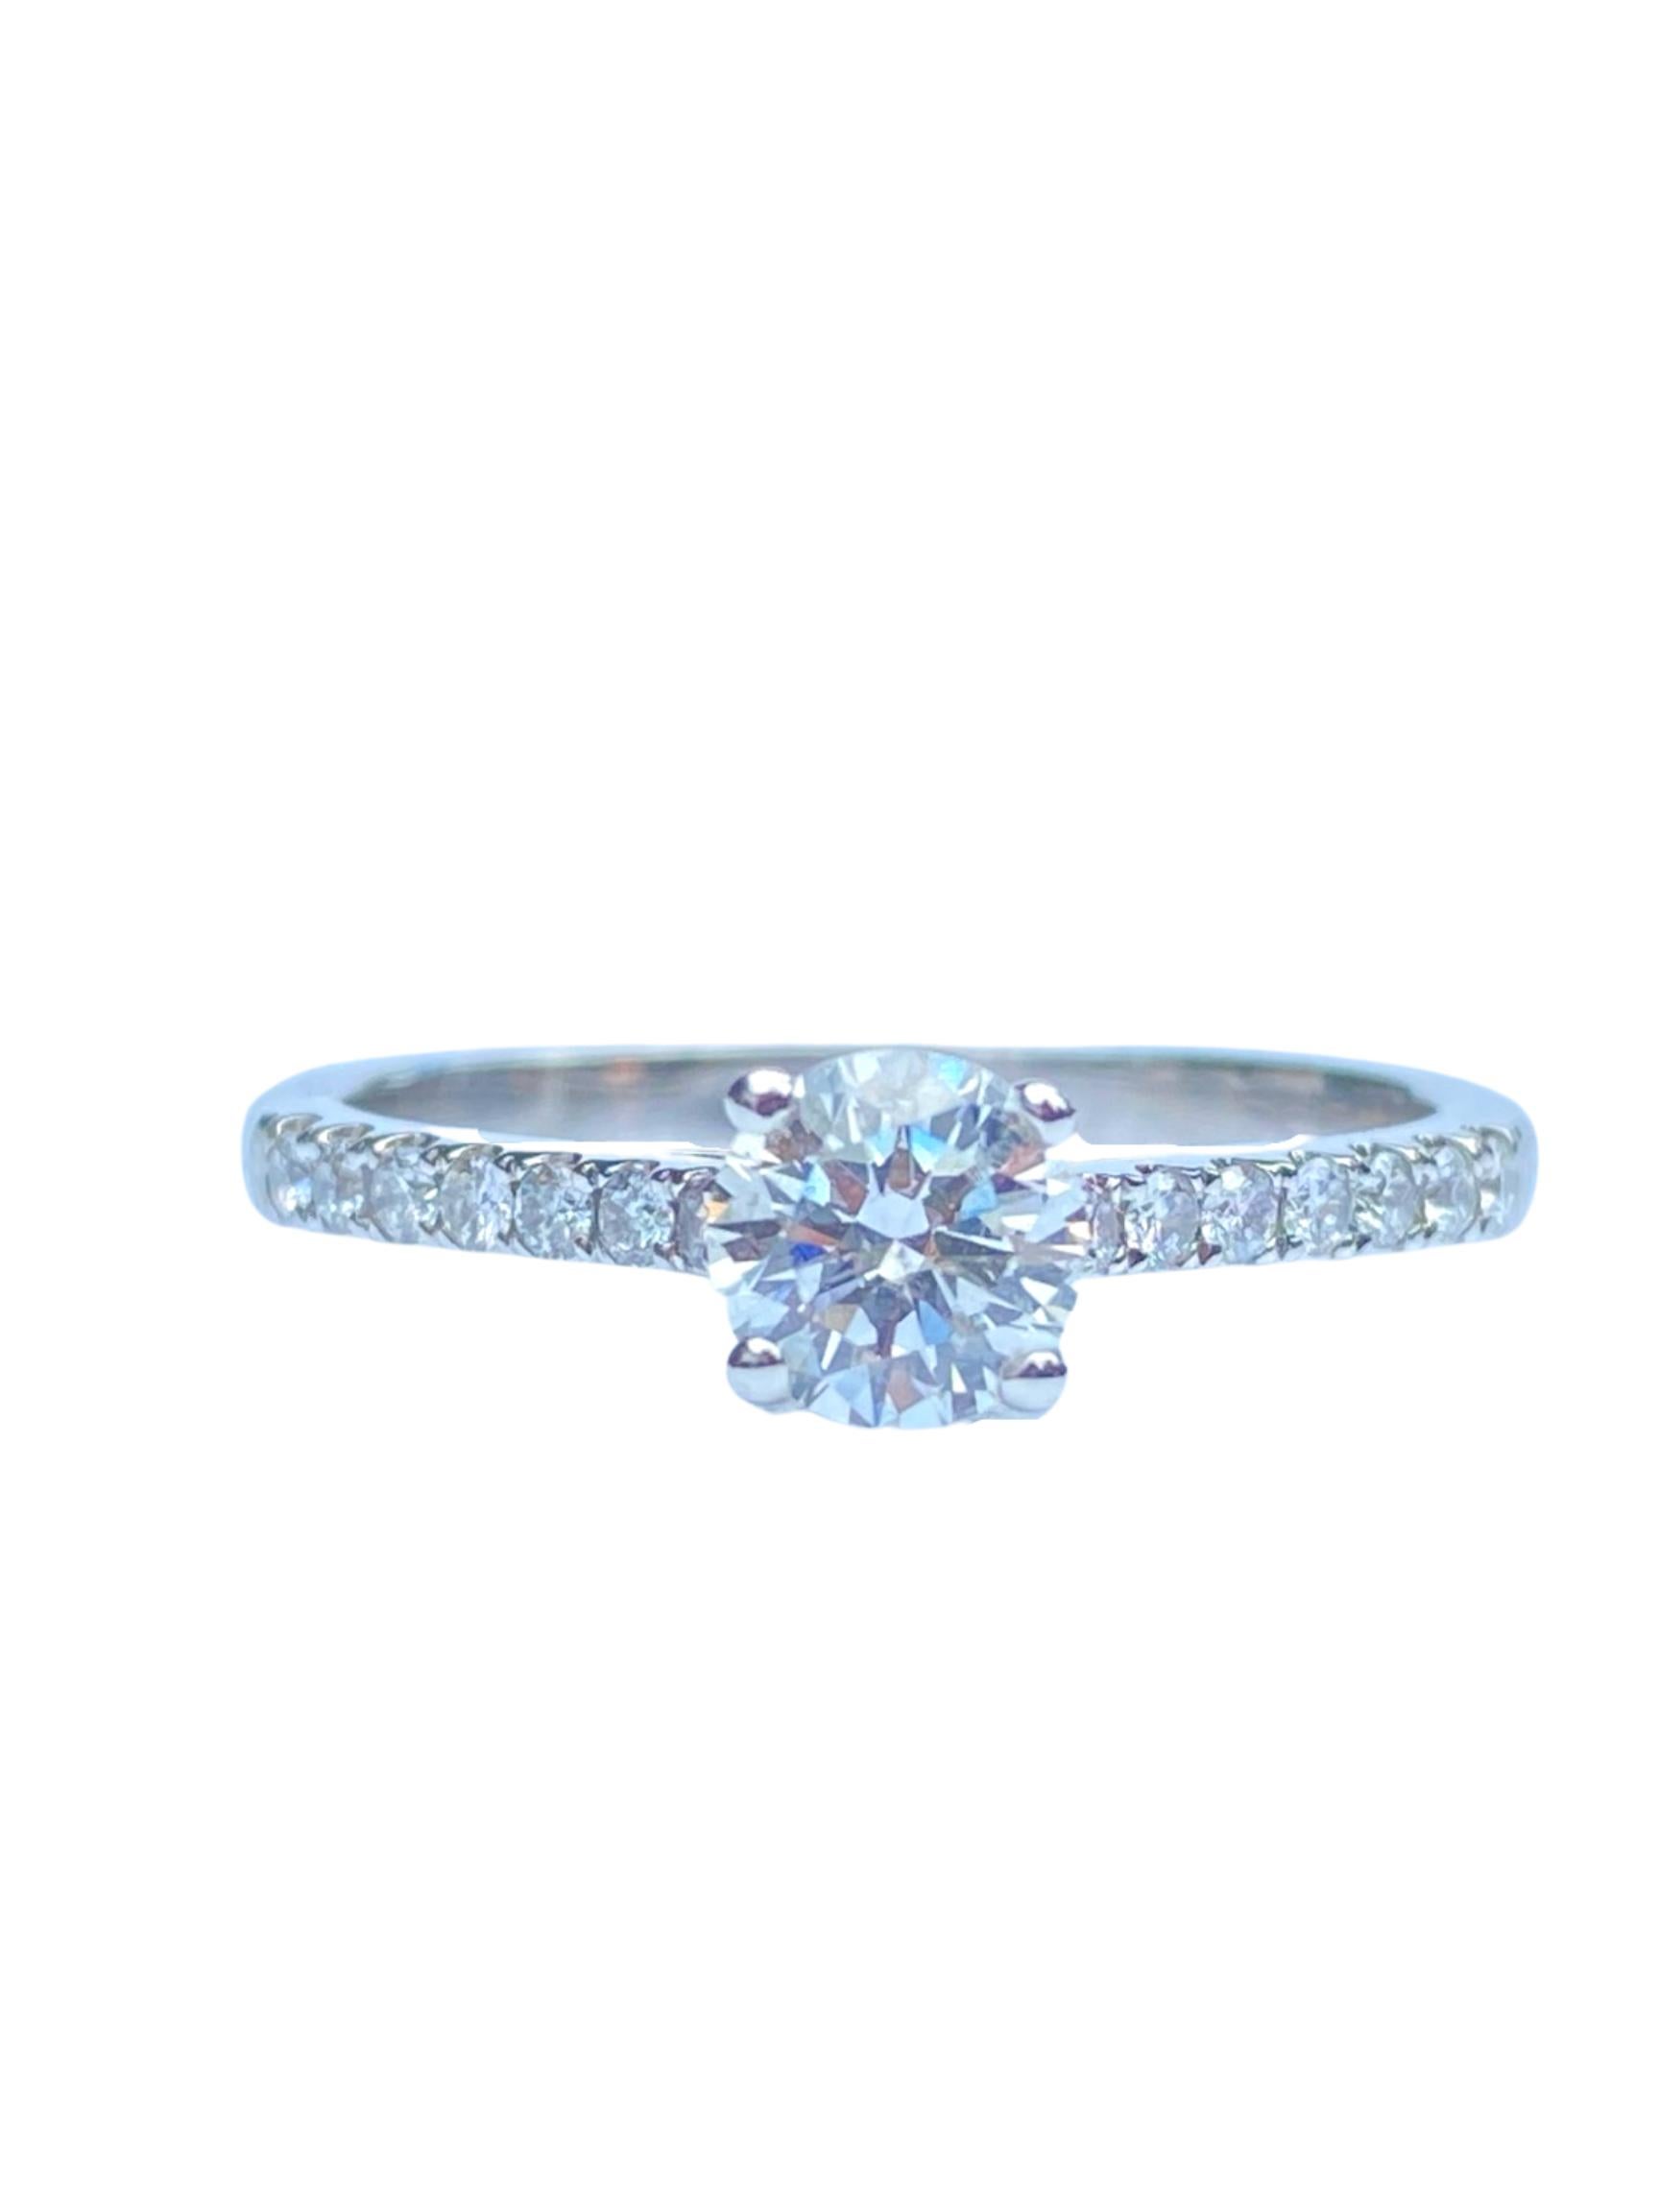 Round Cut 0.55 Carat F-H Color Round-Brilliant Cut Engagement Ring in 18k White Gold For Sale